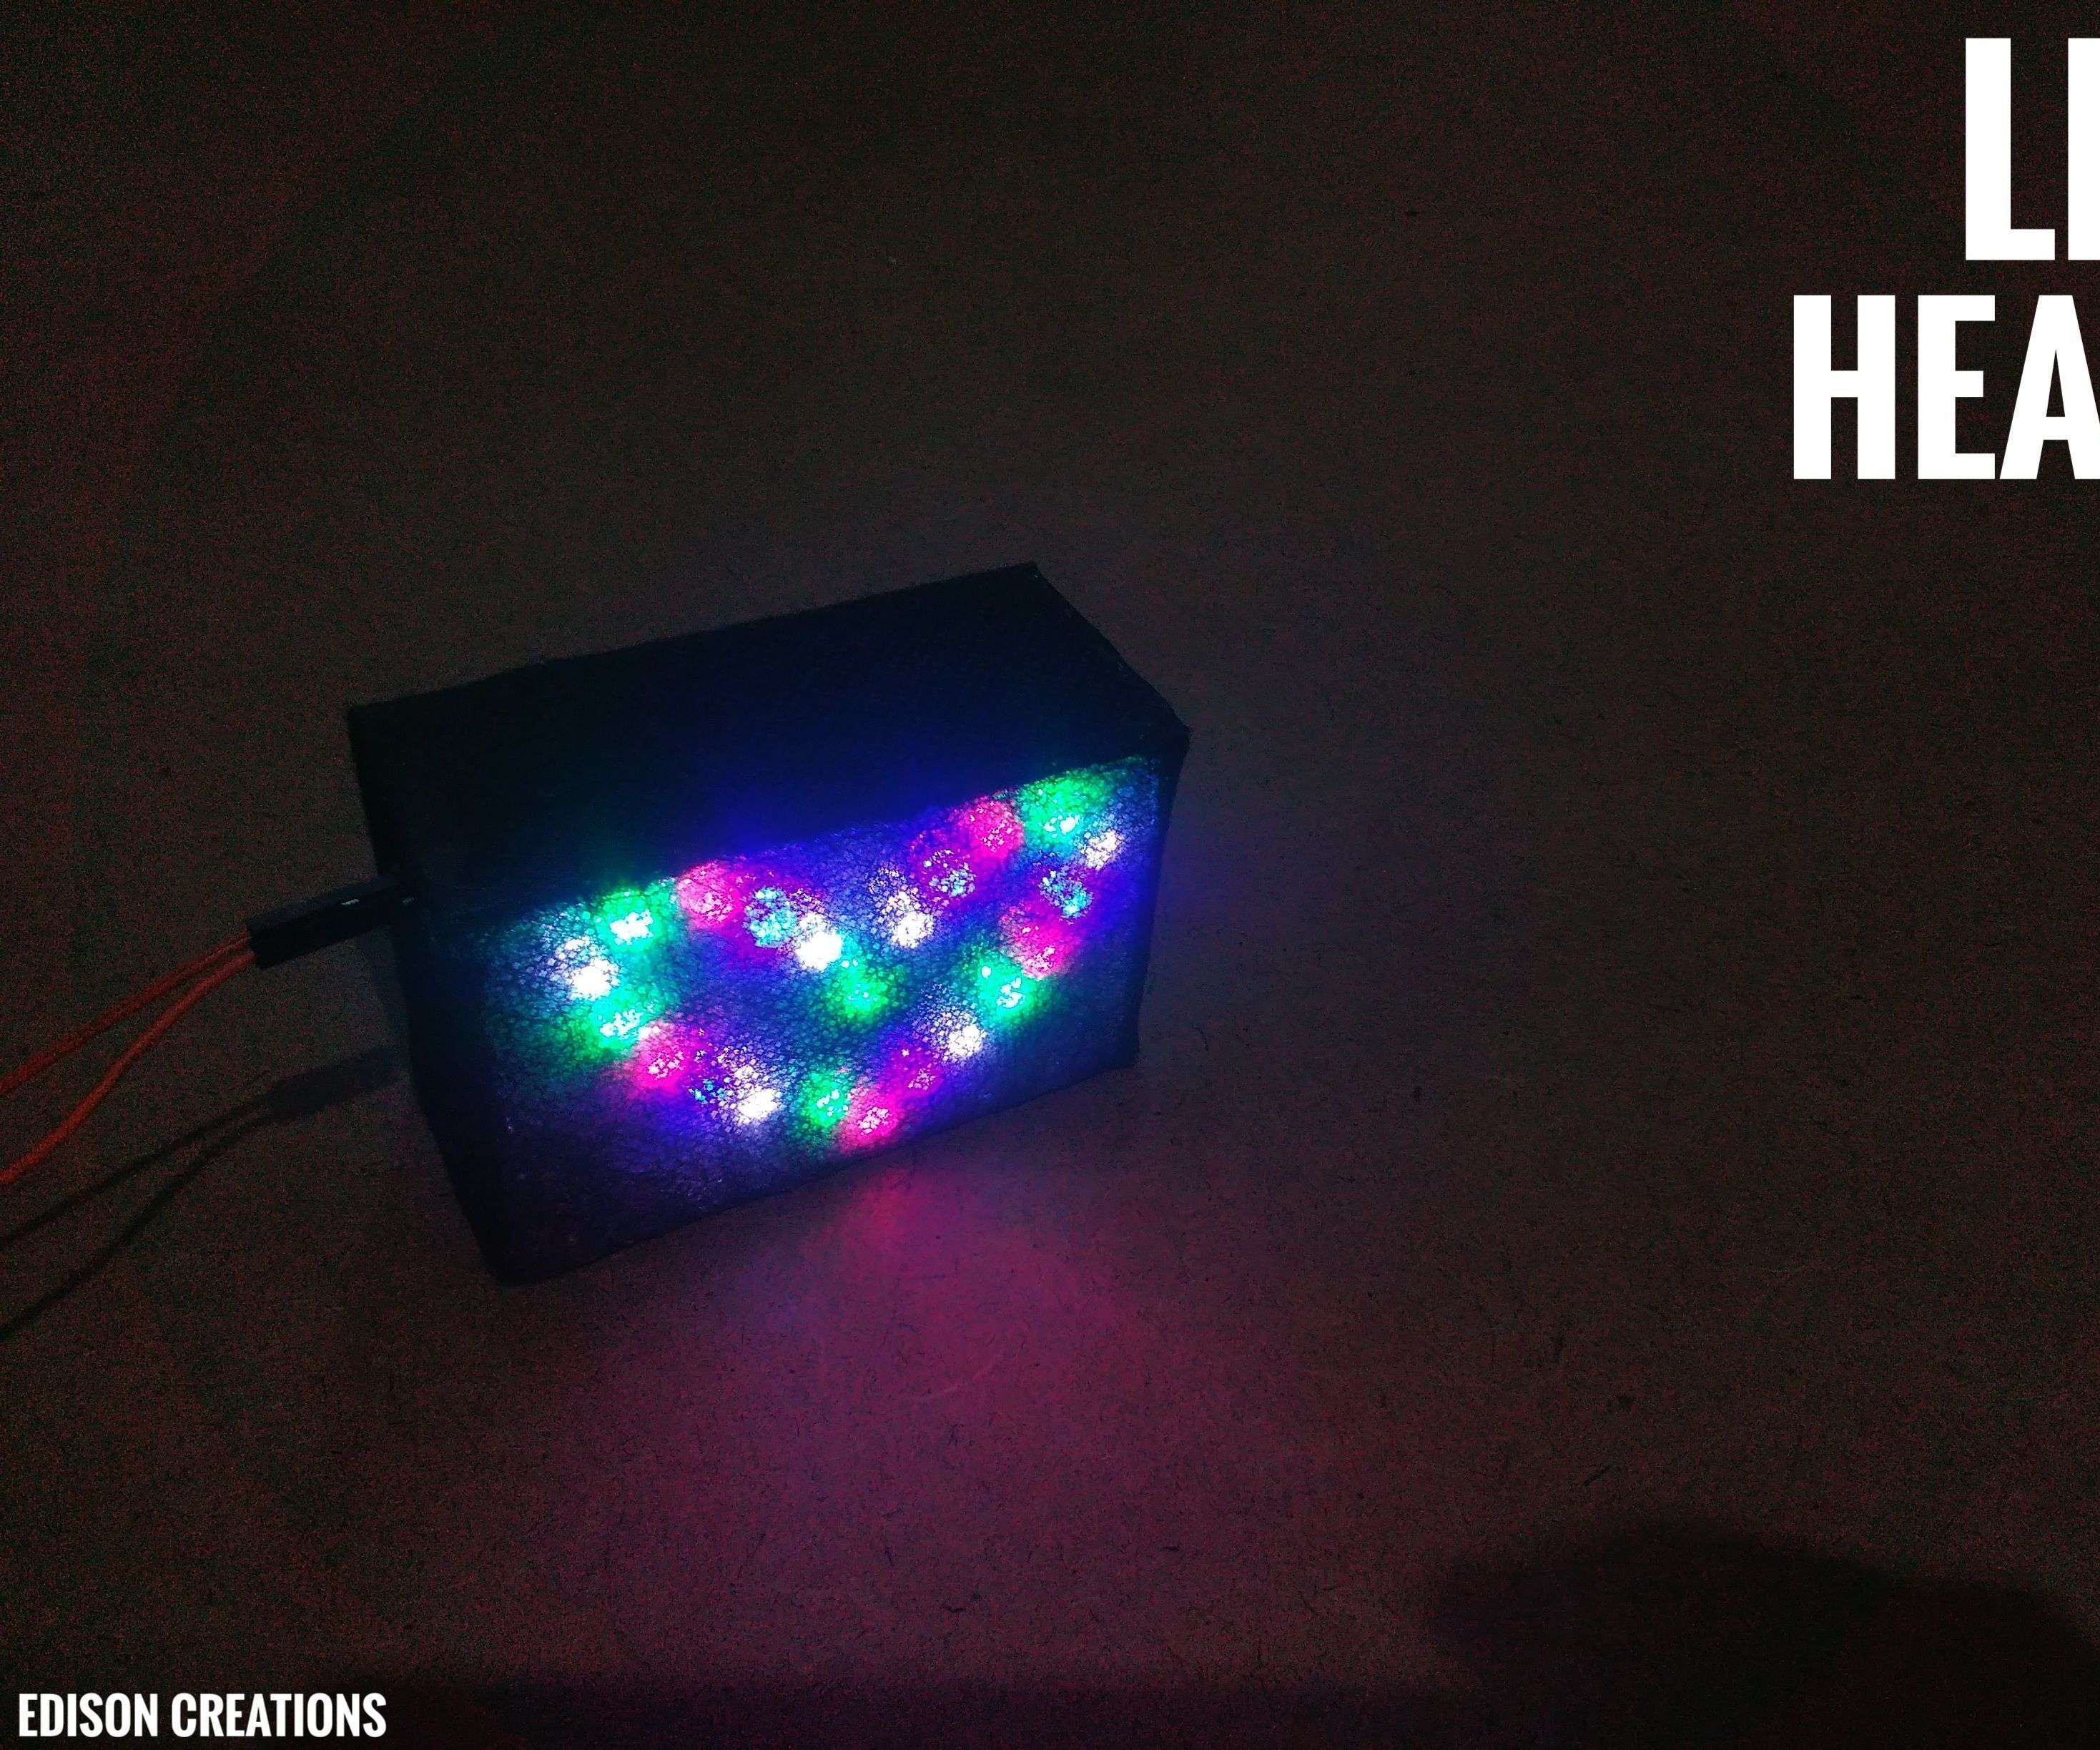 HOW TO MAKE a Simple Flashing LED HEART (astable Multivibrator)